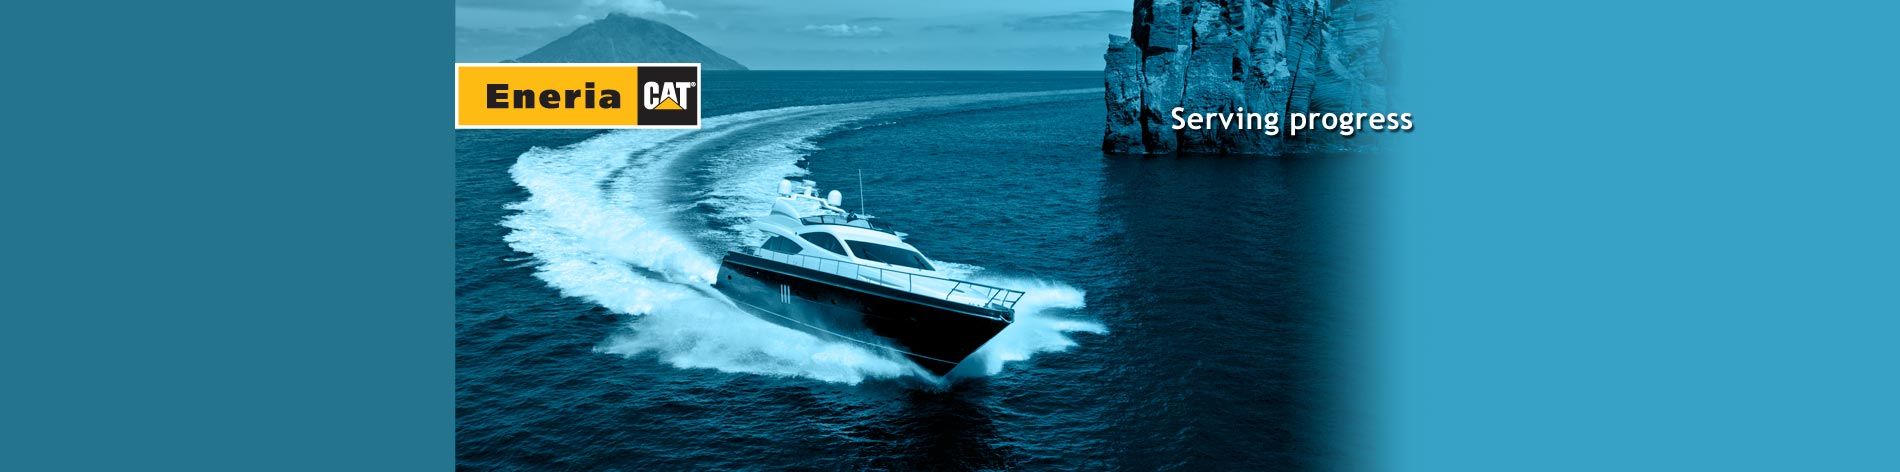 Our Caterpillar marine engines are suited to a variety of applications. Our testimonials speak for themselves.